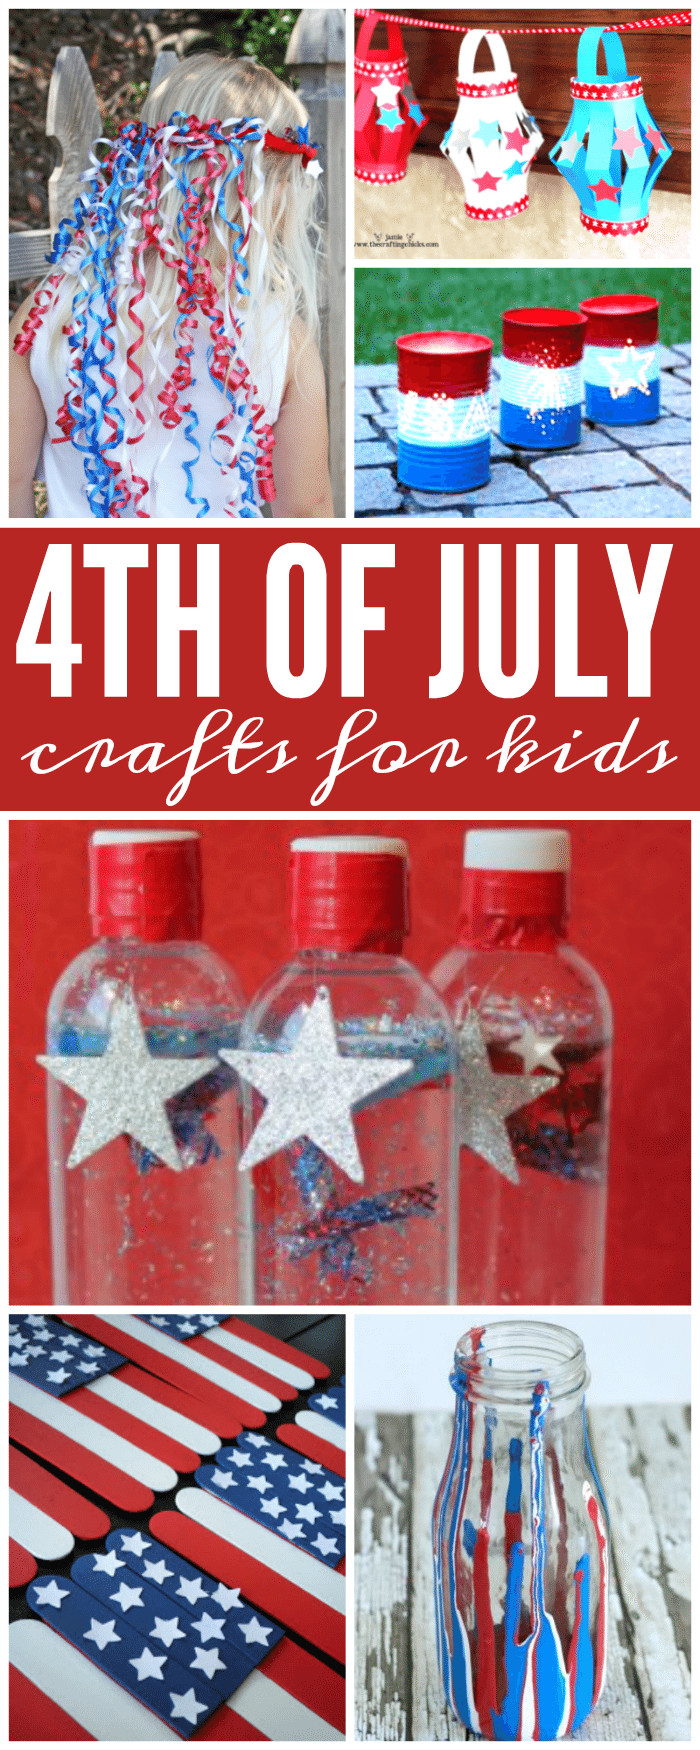 4Th Of July Crafts For Kids
 4th of July Crafts for Kids